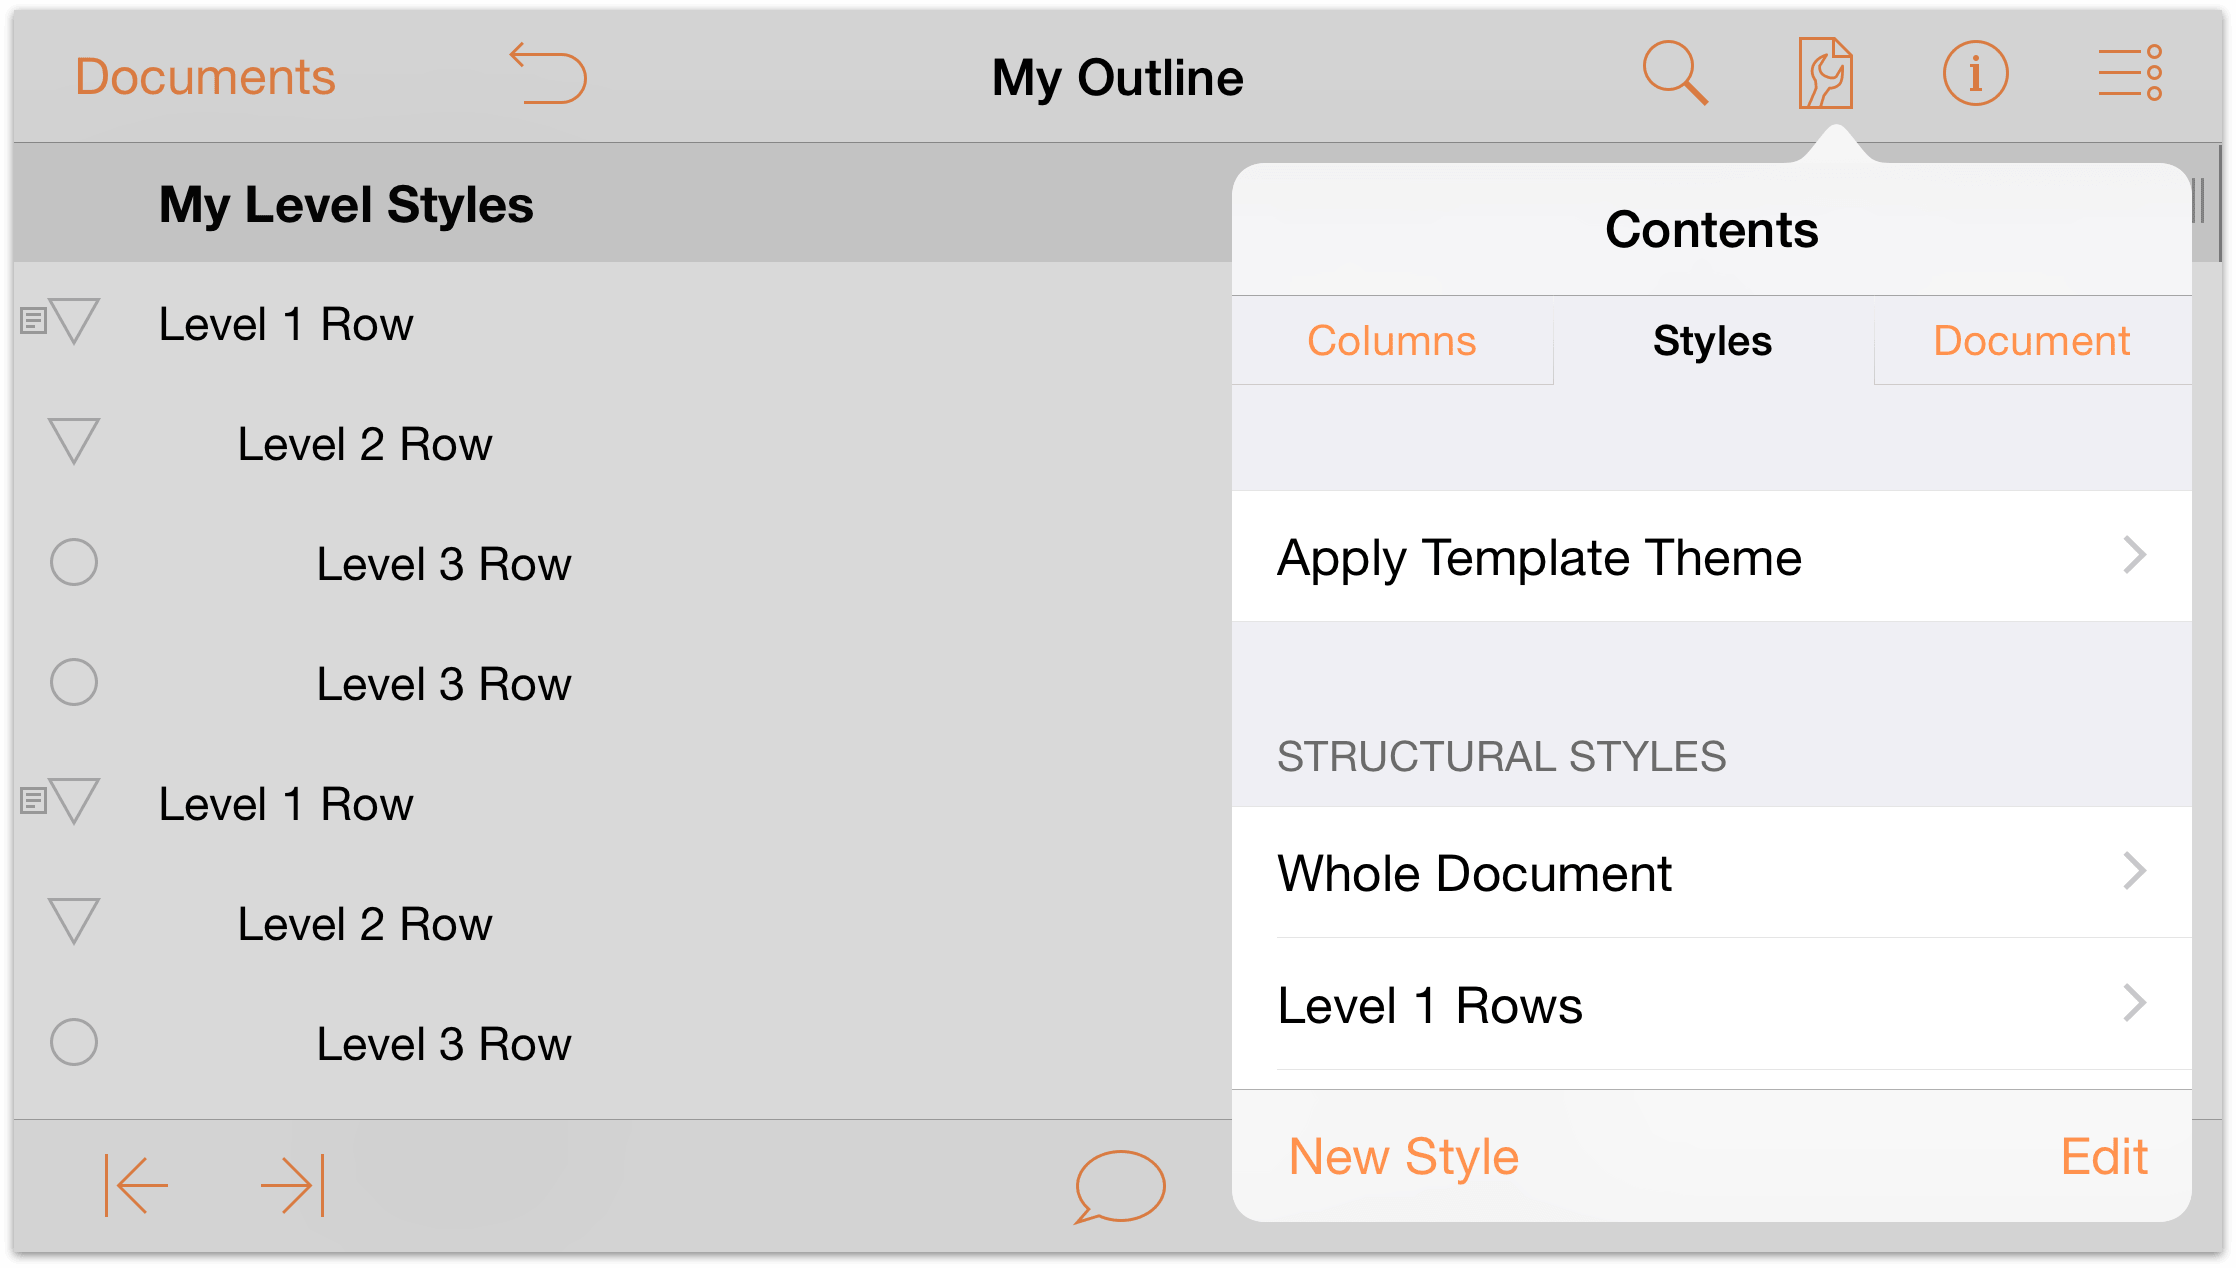 The Contents menu on an iPhone 6 Plus in Landscape orientation